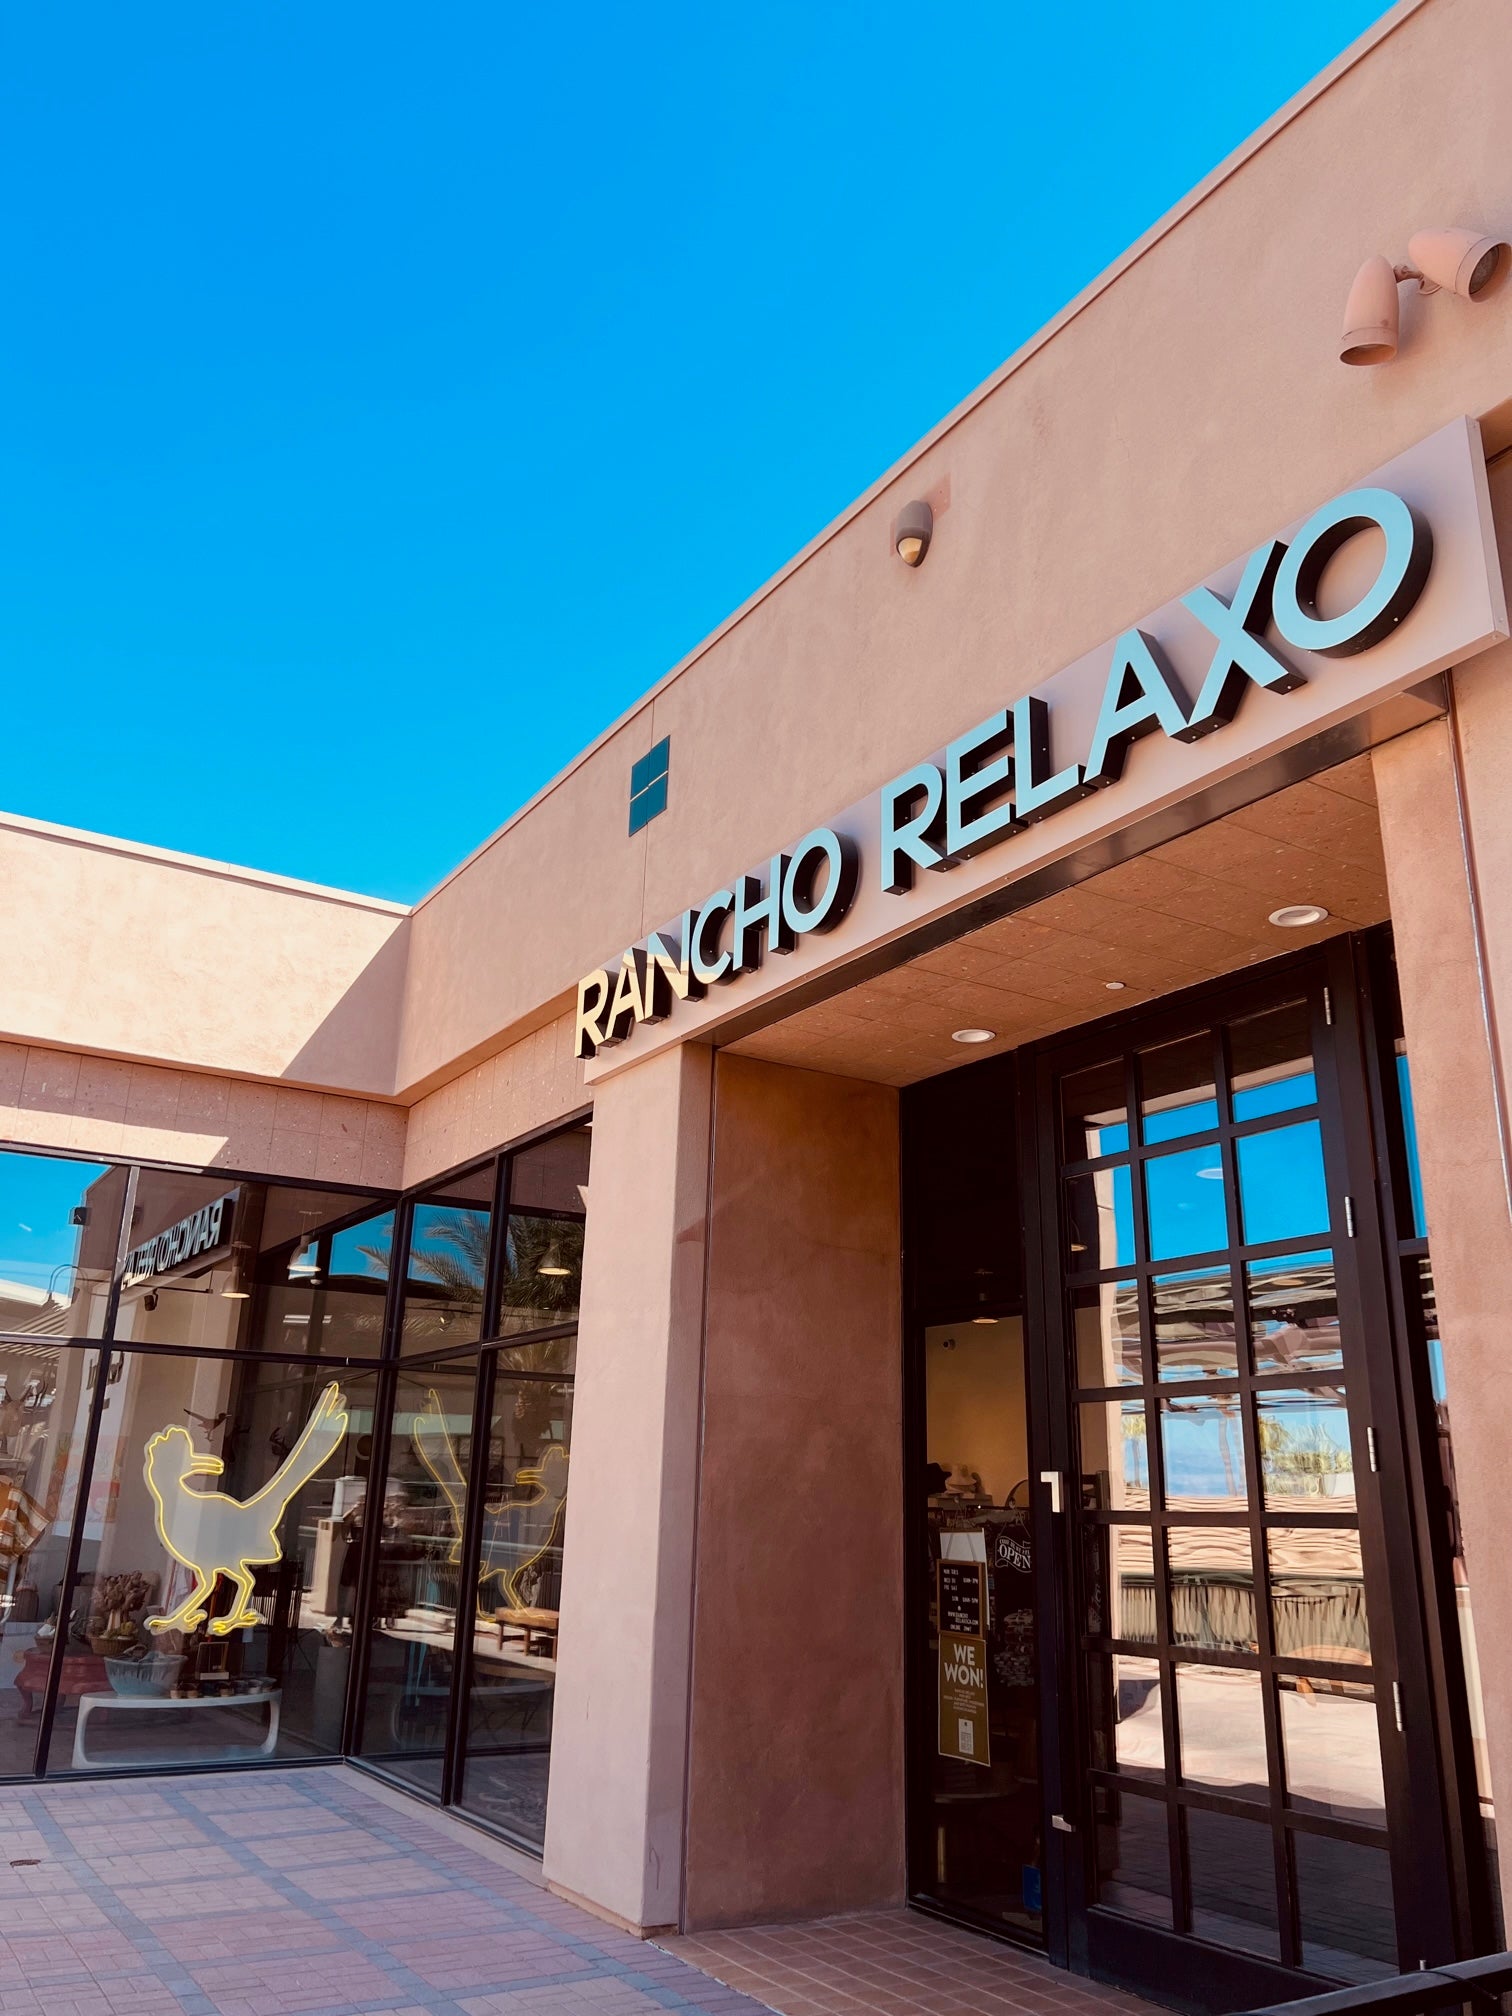 Rancho Relaxo Welcome to your Relaxation Outfitter